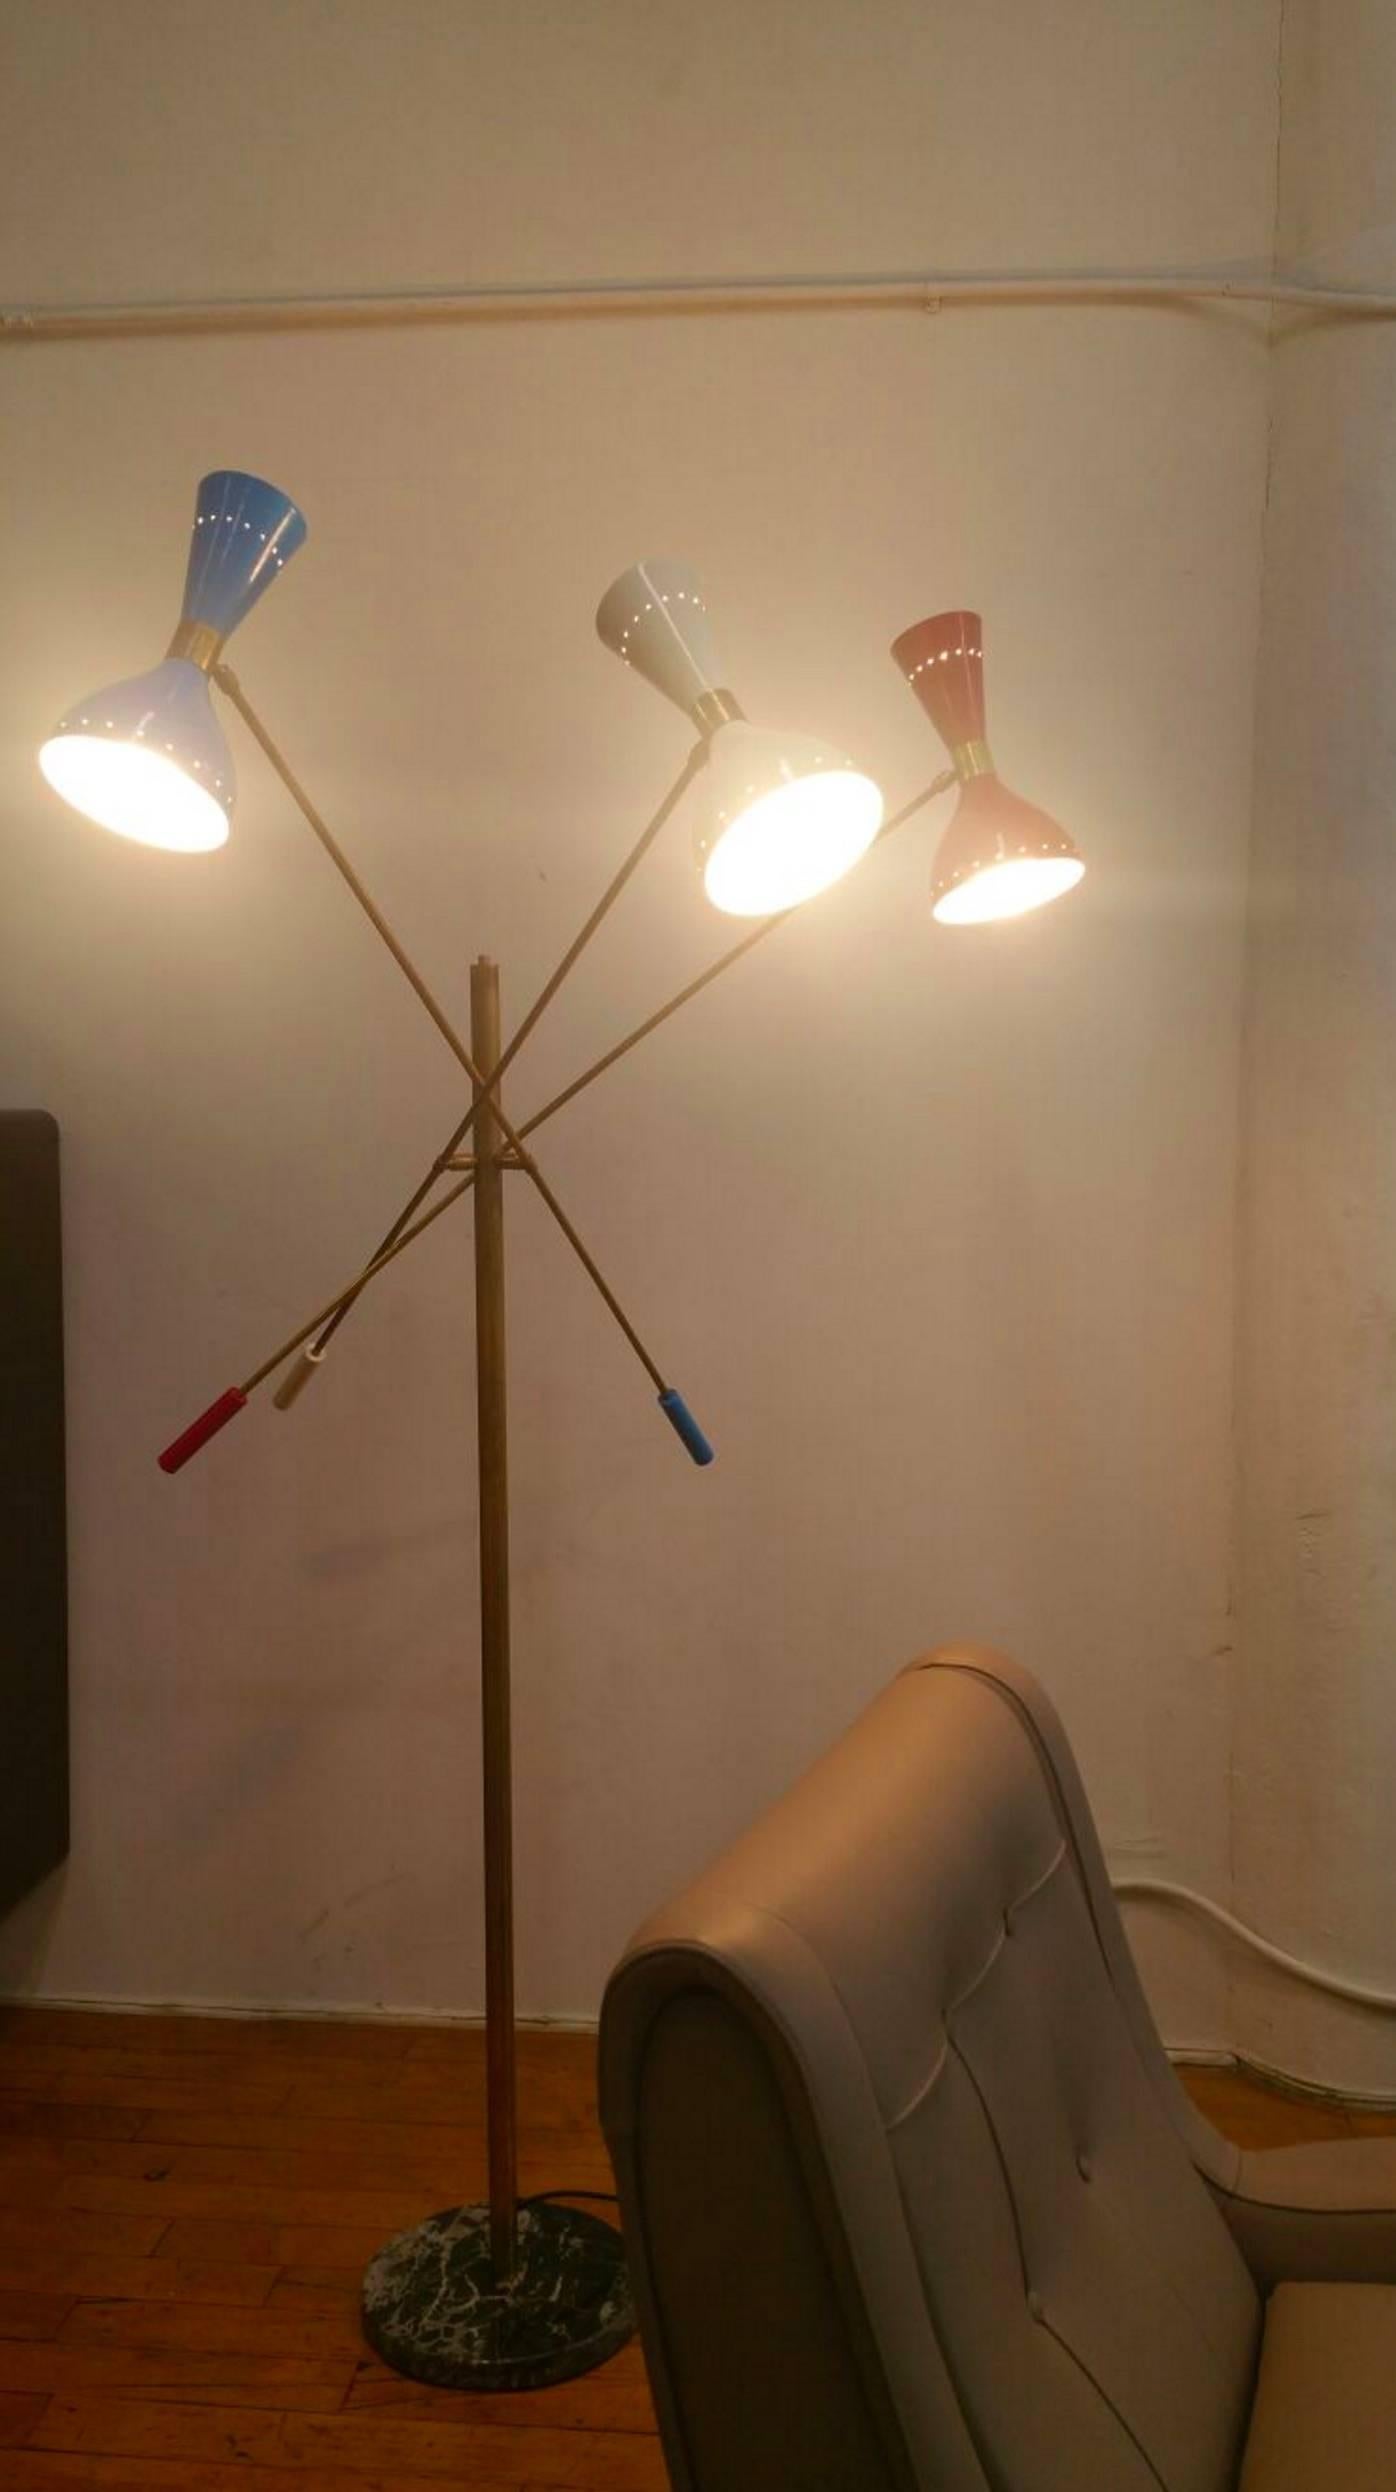 Italian midcentury floor lamp three-arm adjustable lamp inspired by the Italian vintage 1960s designs. Conical shades multi-color, marble base, arms and body made of solid brass and hand wax painted. Each arm features counter weights of the same